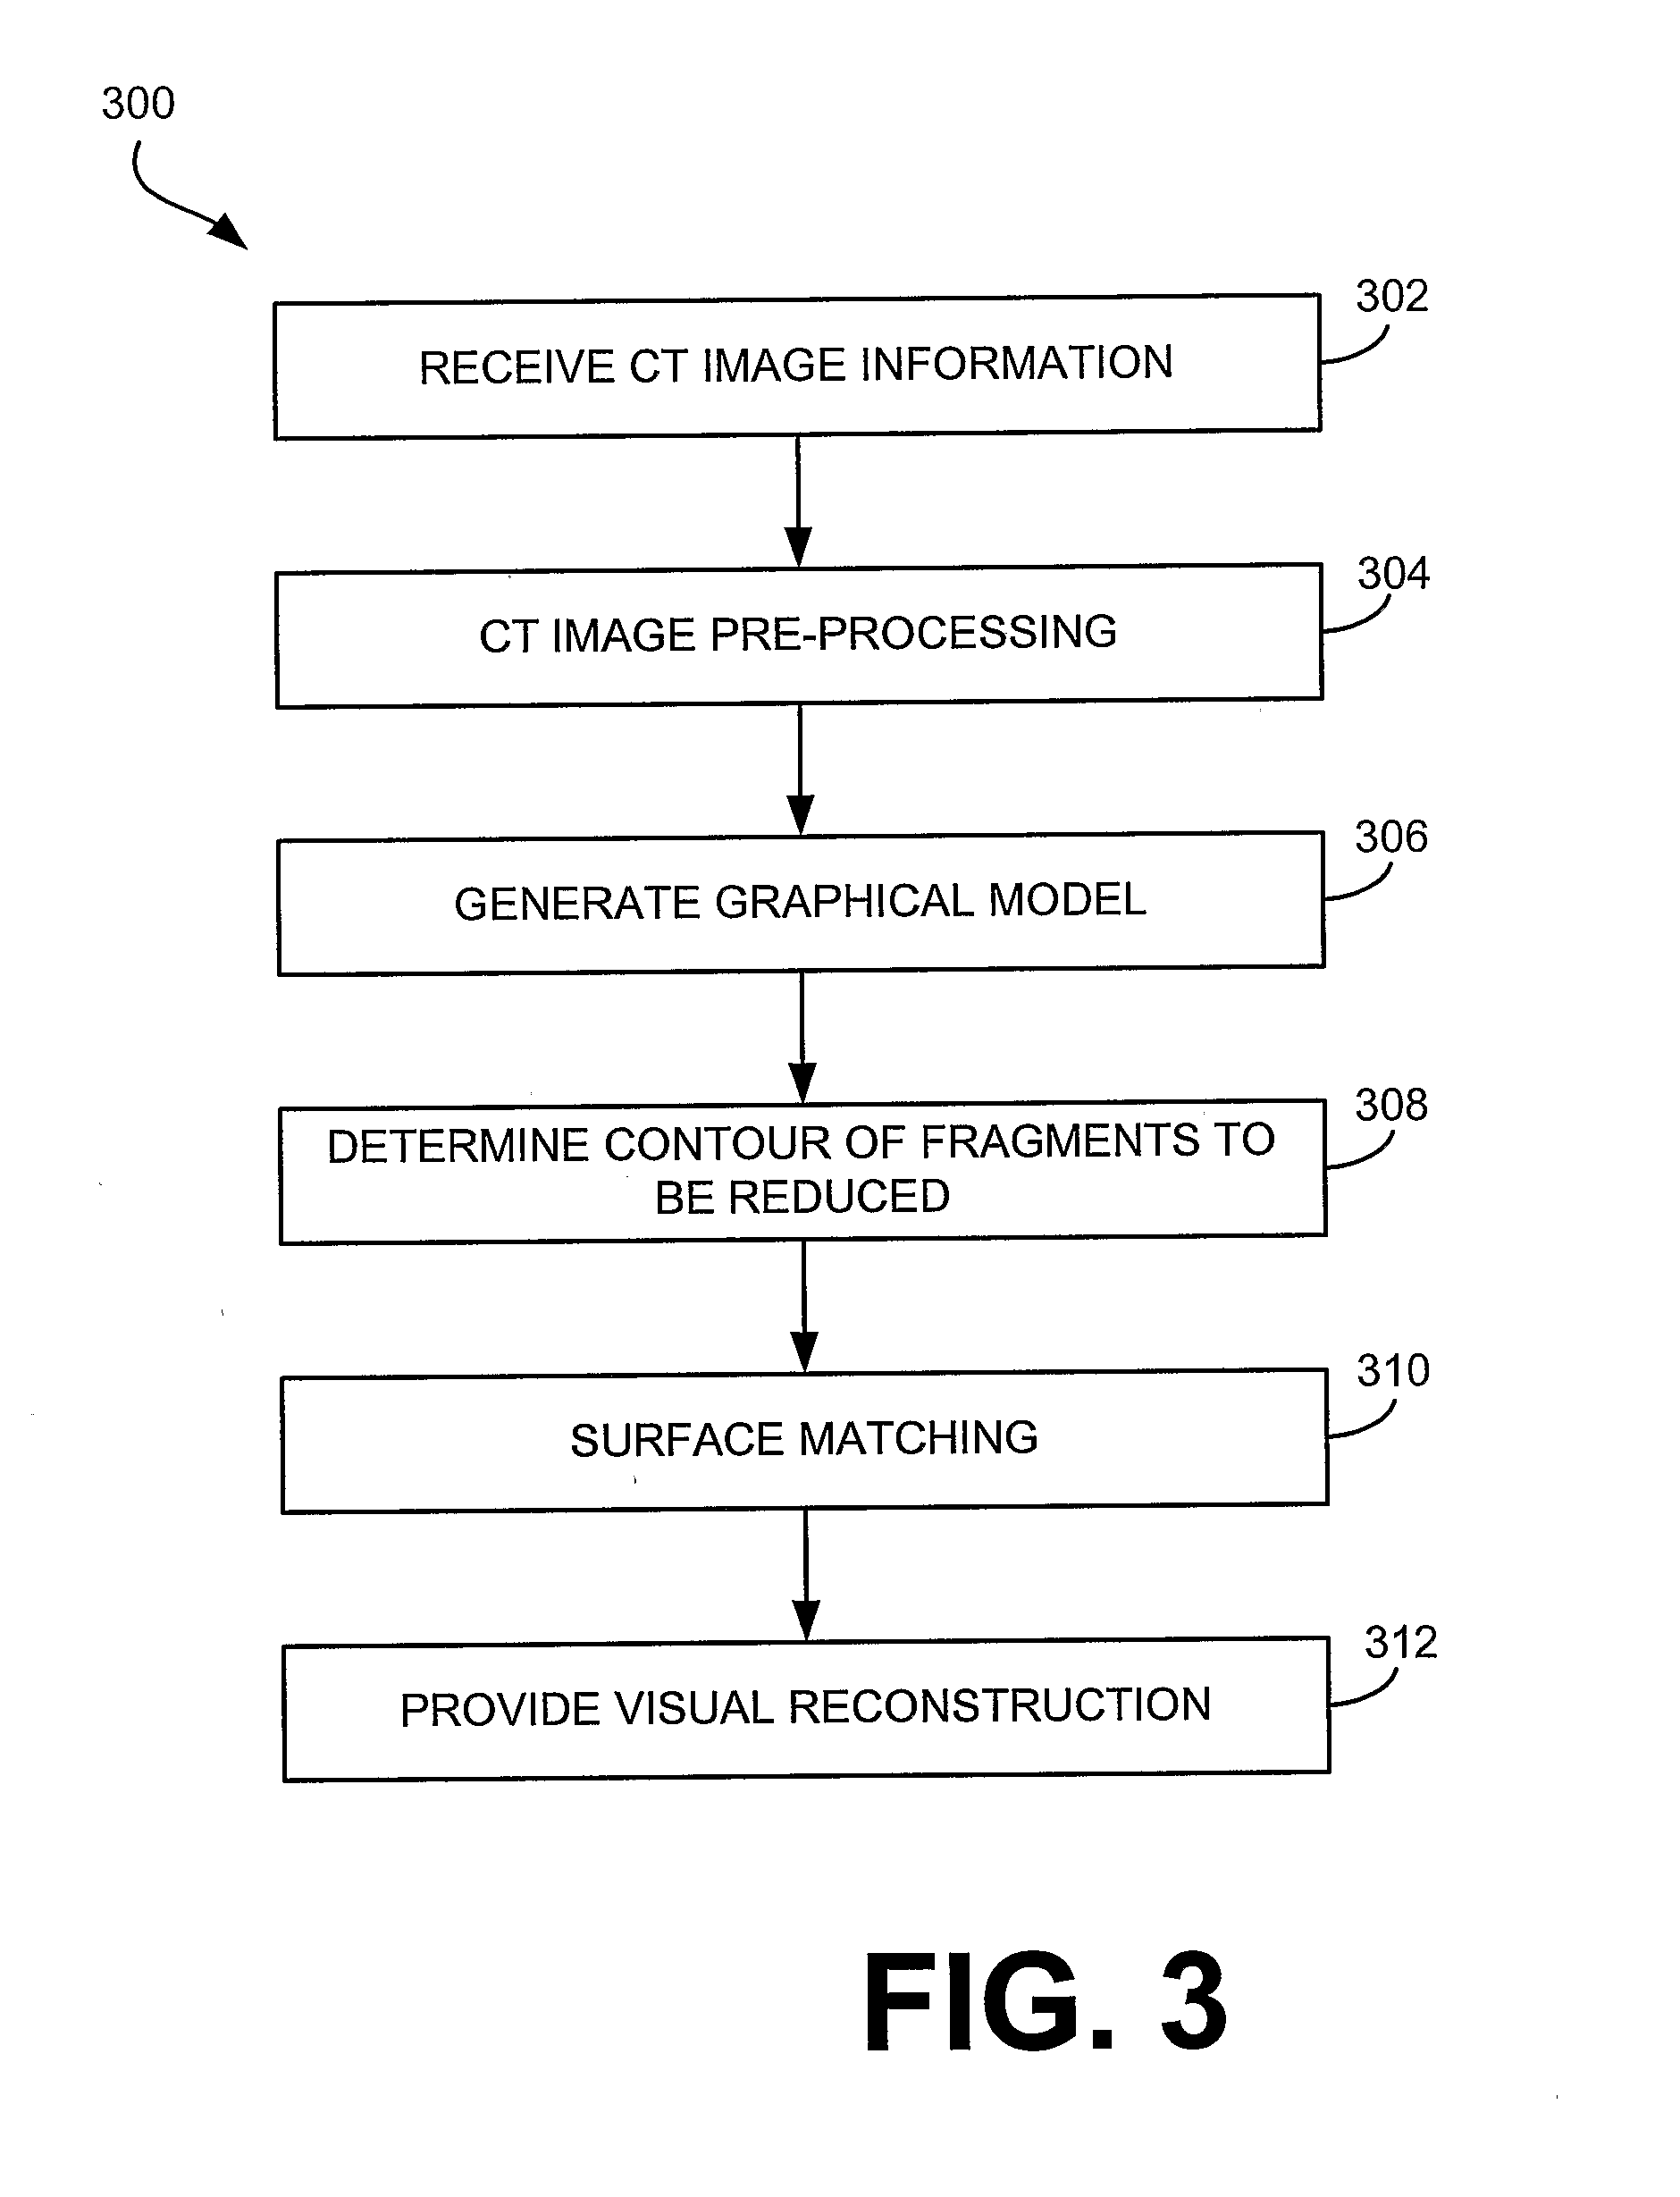 Virtual Surgical System and Methods